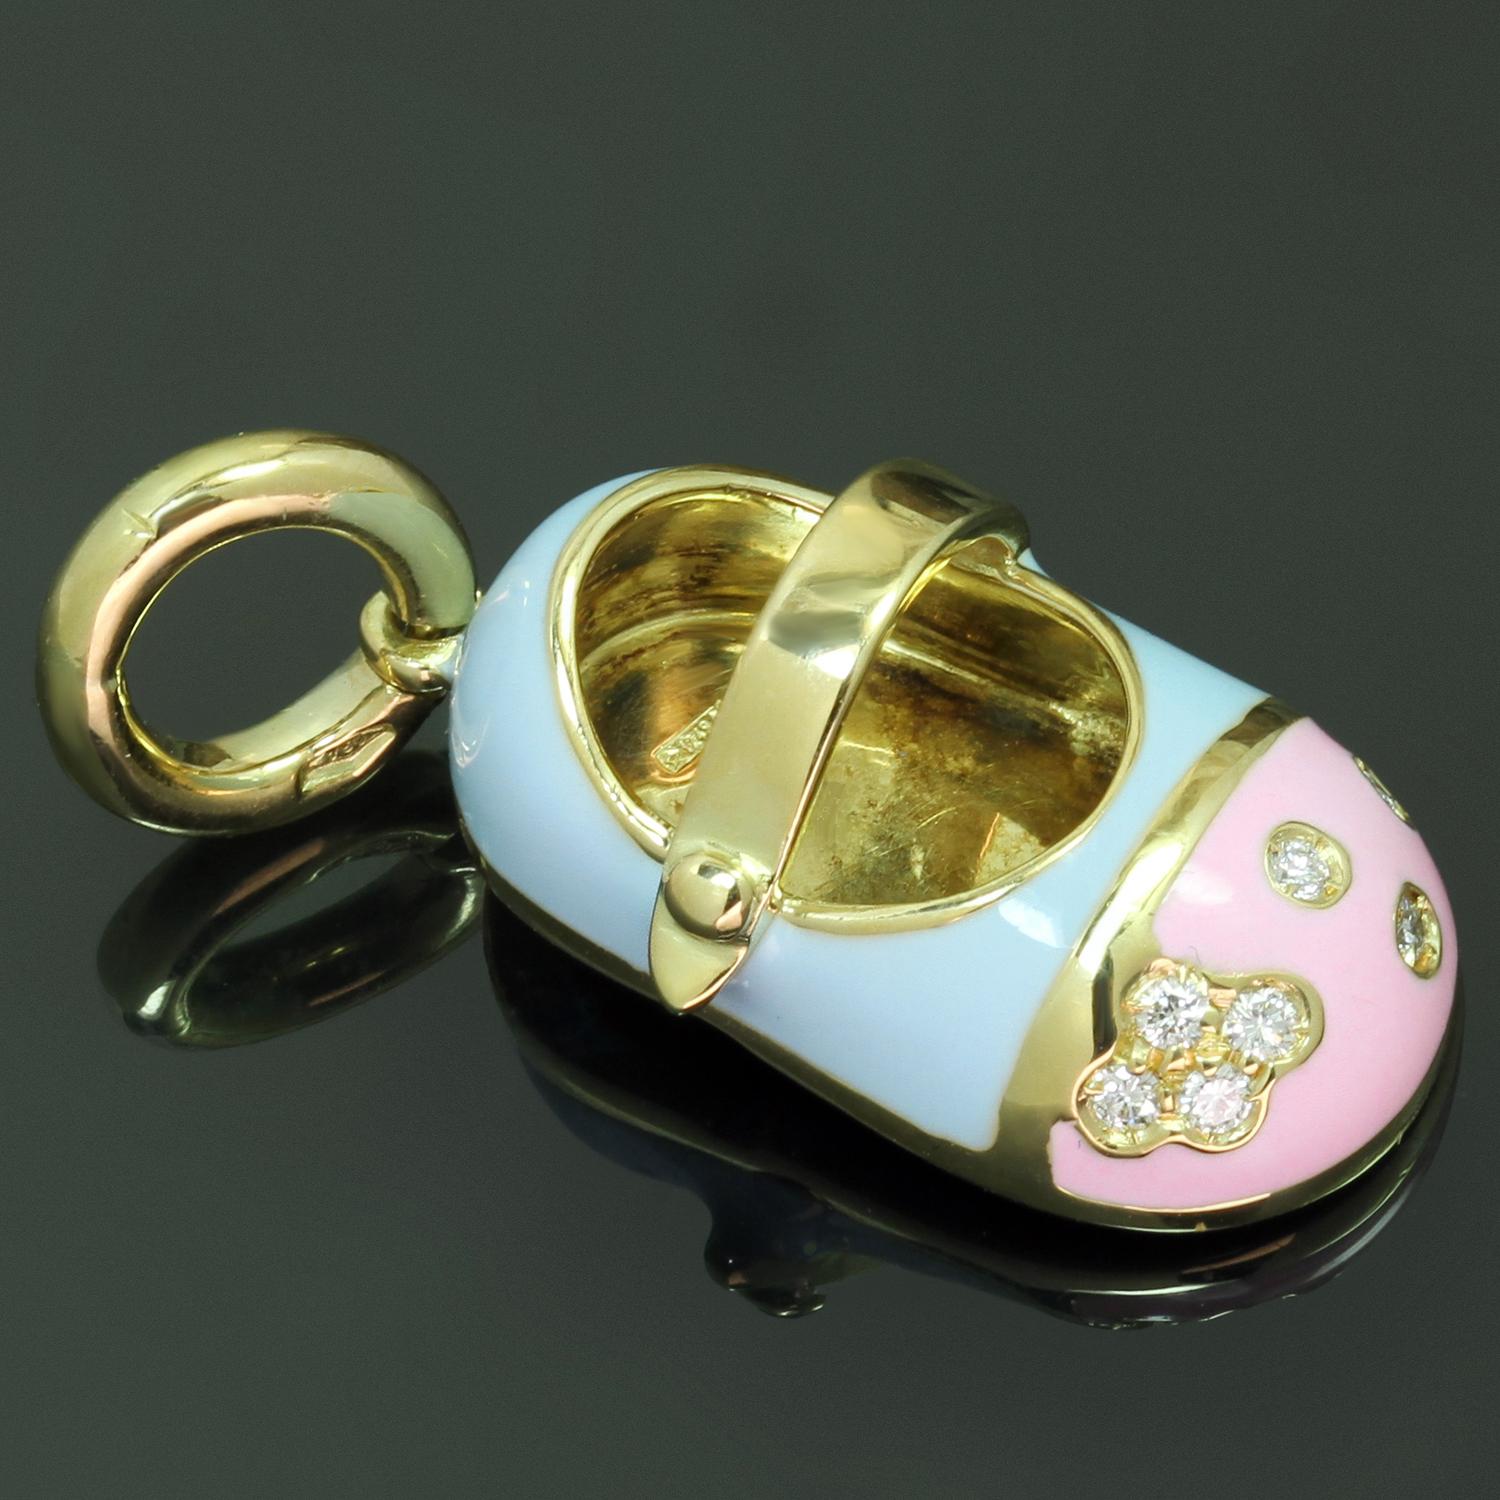 This gorgeous baby girl shoe pendant is crafted in 18k yellow gold and blue and pink enamel and is set with brilliant-cut round F-G VS1-VS2 diamonds weighing an estimated 0.16 carats. Made in Italy circa 1990s. Measurements: 0.43